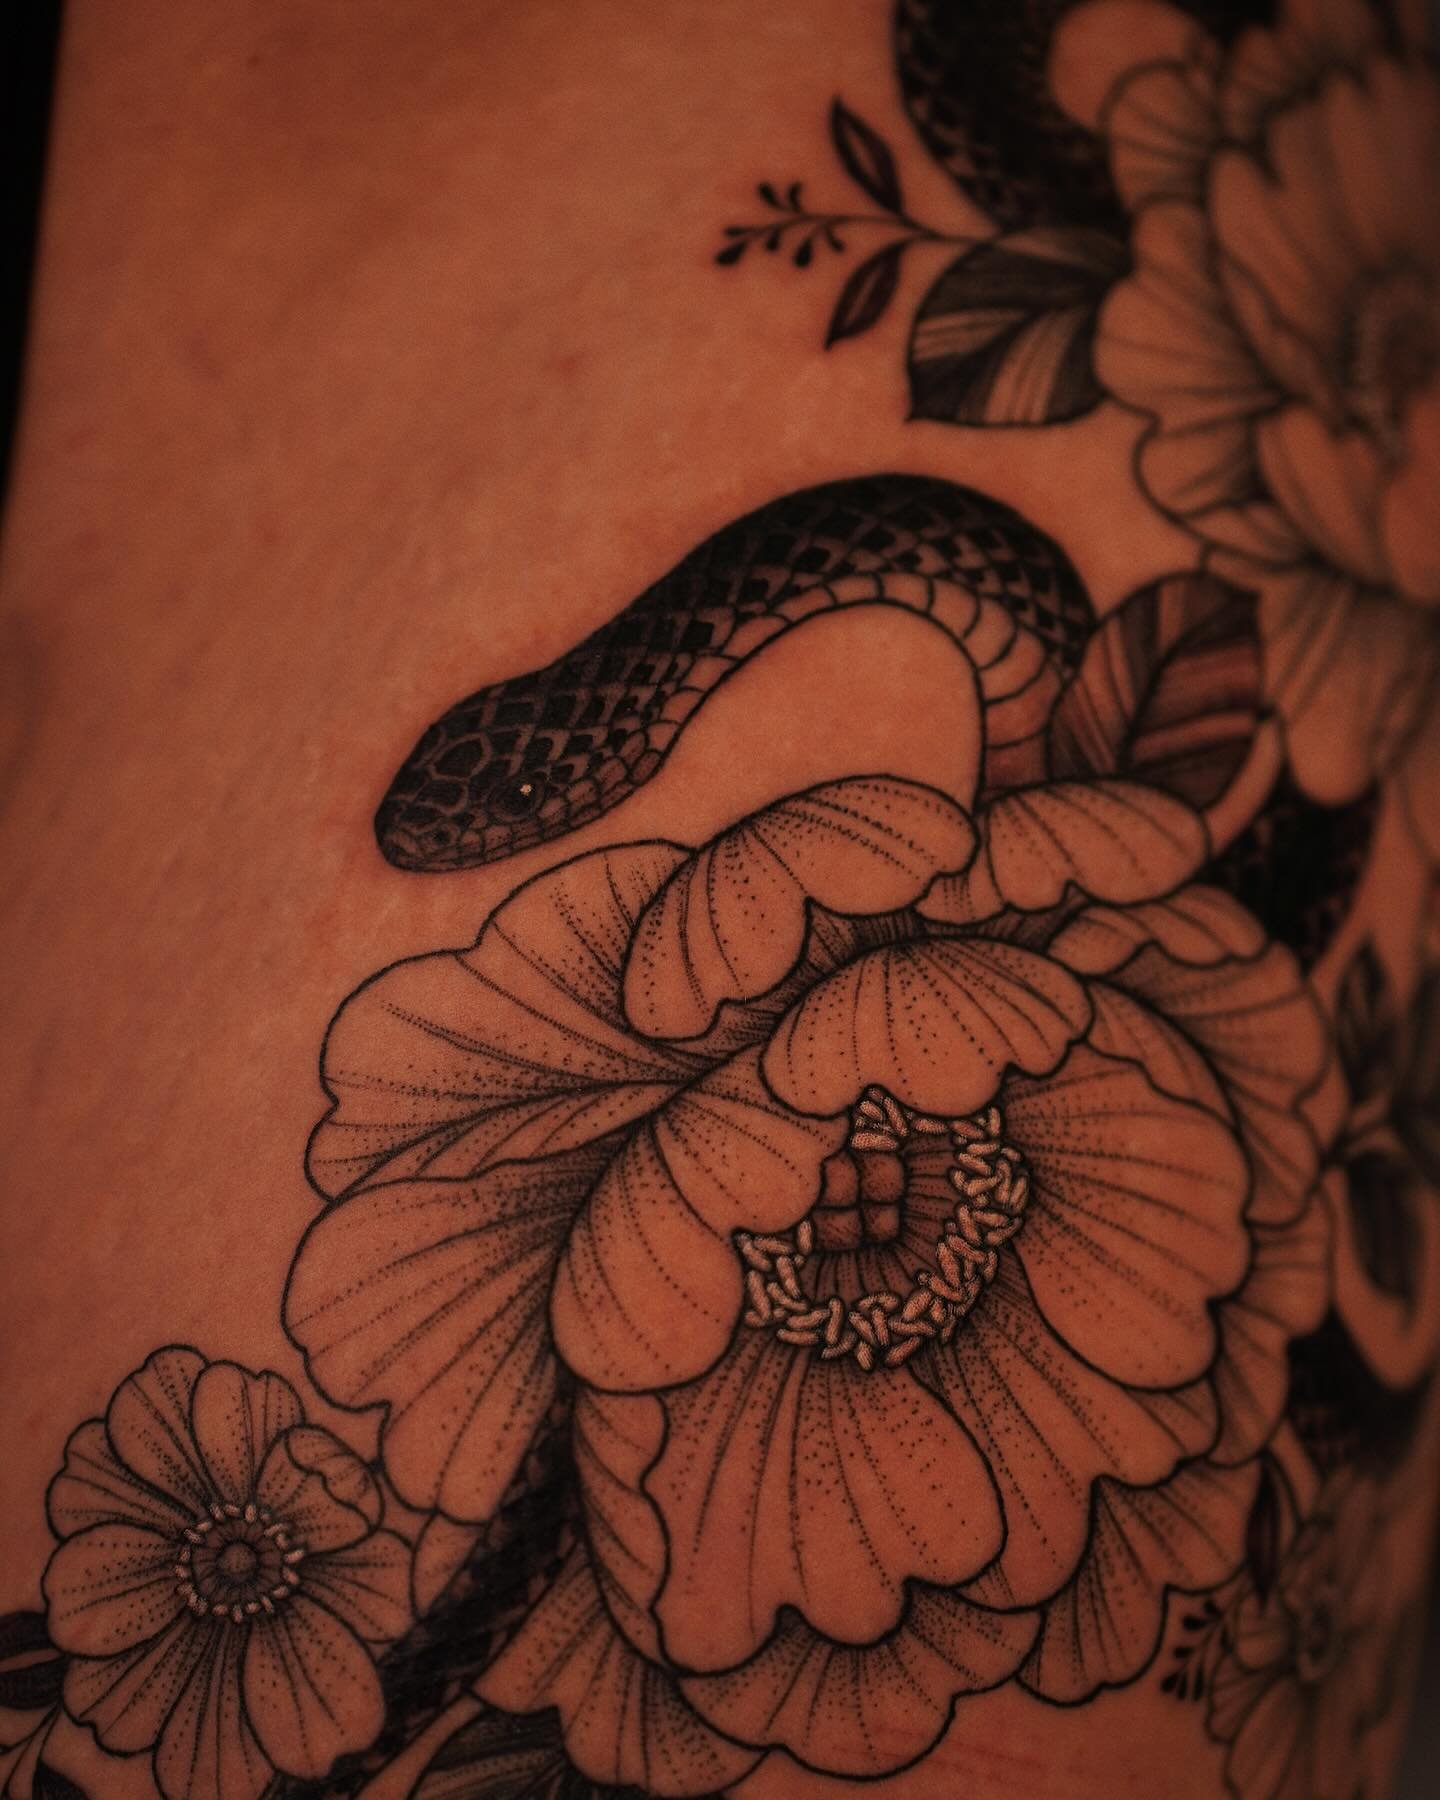 Slithering into the weekend like 🐍 thanks so much for sitting so well and getting this done so fast Hayley!